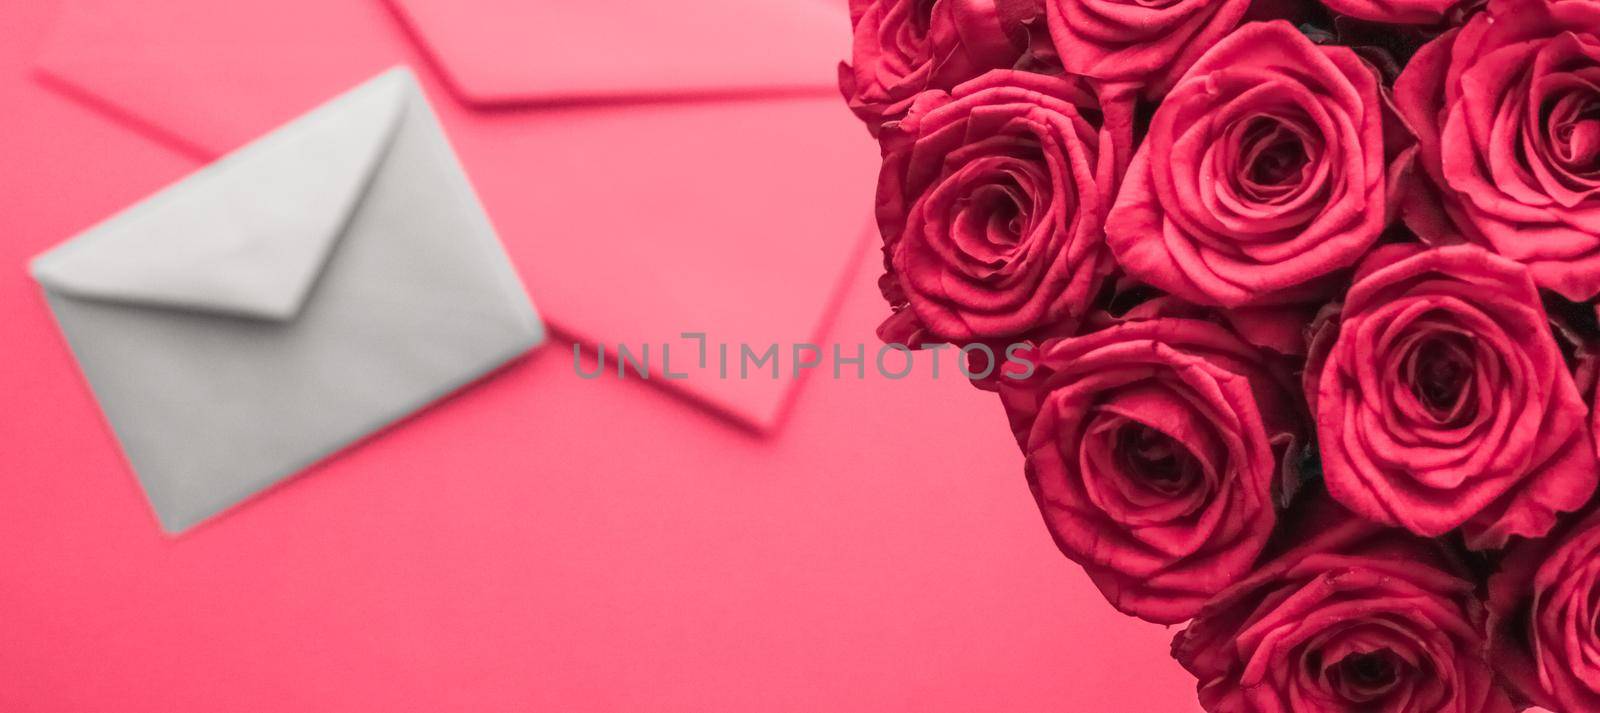 Love letter and flowers delivery on Valentines Day, luxury bouquet of roses and card on pink background for romantic holiday design by Anneleven